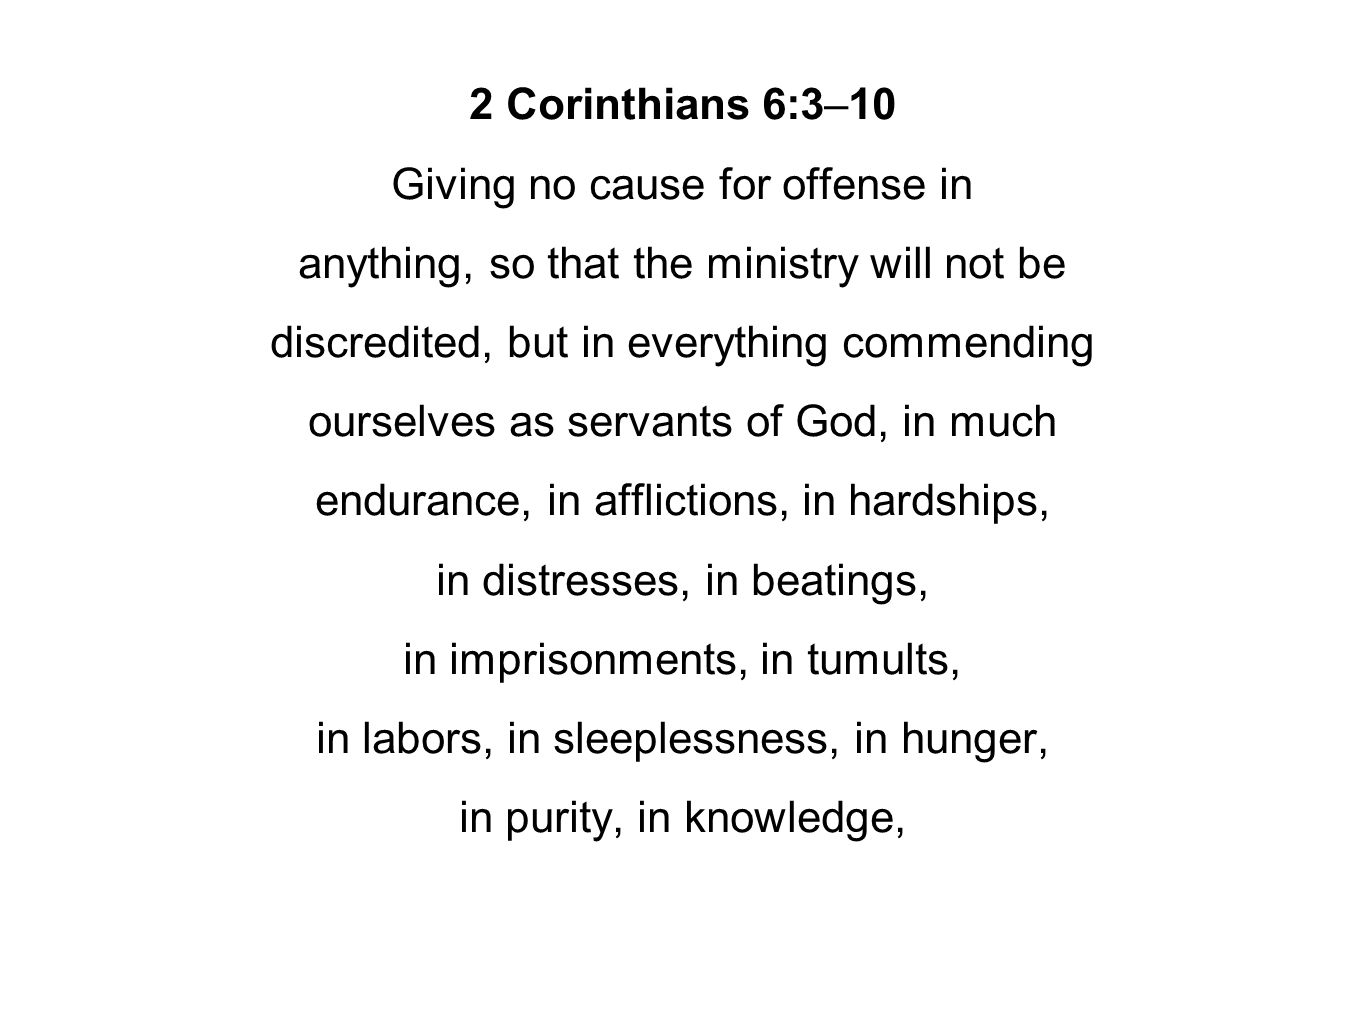 2 Corinthians 6:3–10 Giving no cause for offense in anything, so that the ministry will not be discredited, but in everything commending ourselves as servants of God, in much endurance, in afflictions, in hardships, in distresses, in beatings, in imprisonments, in tumults, in labors, in sleeplessness, in hunger, in purity, in knowledge,